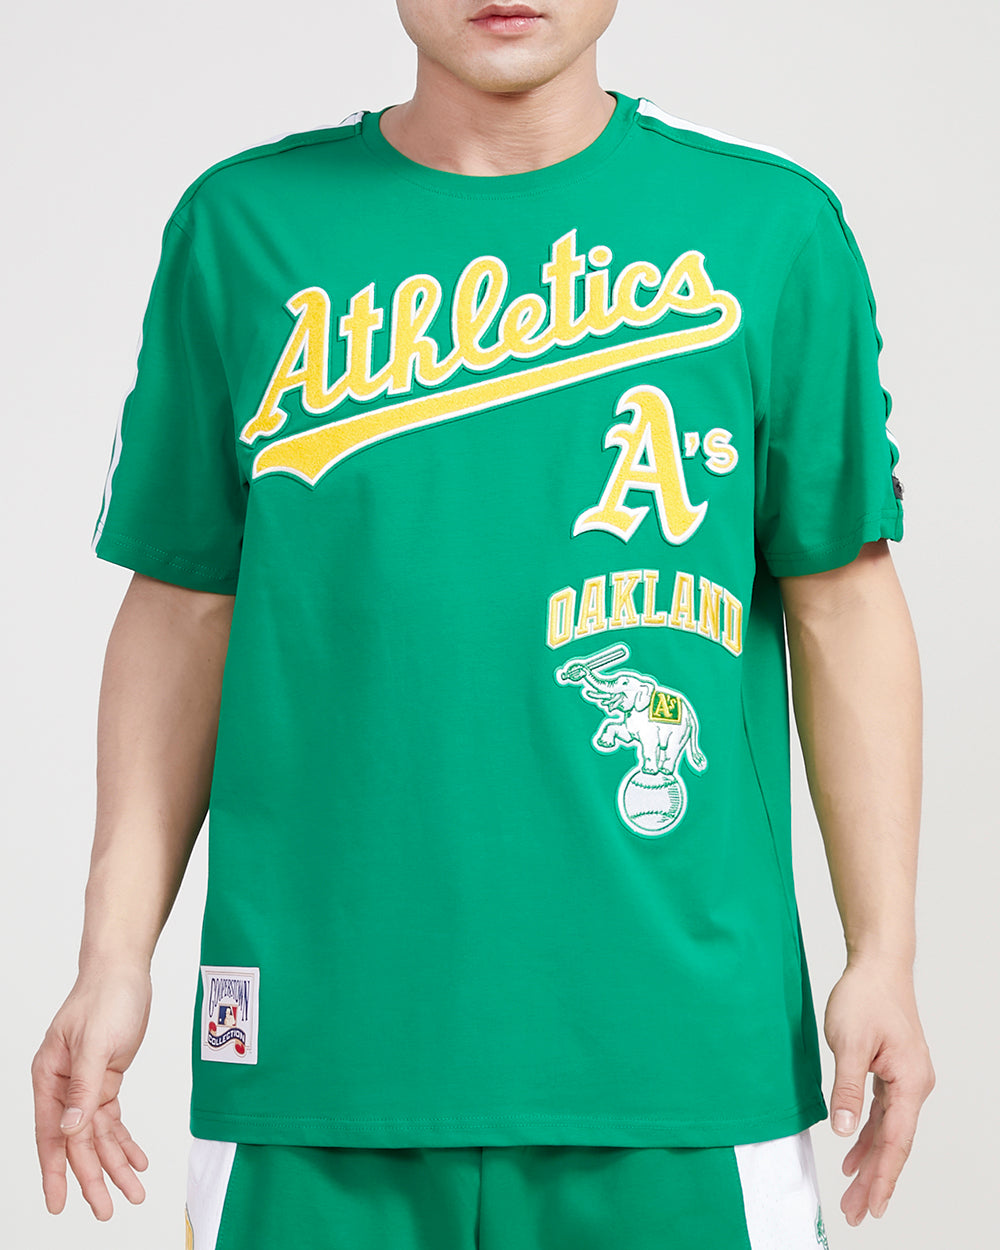 kelly green a's